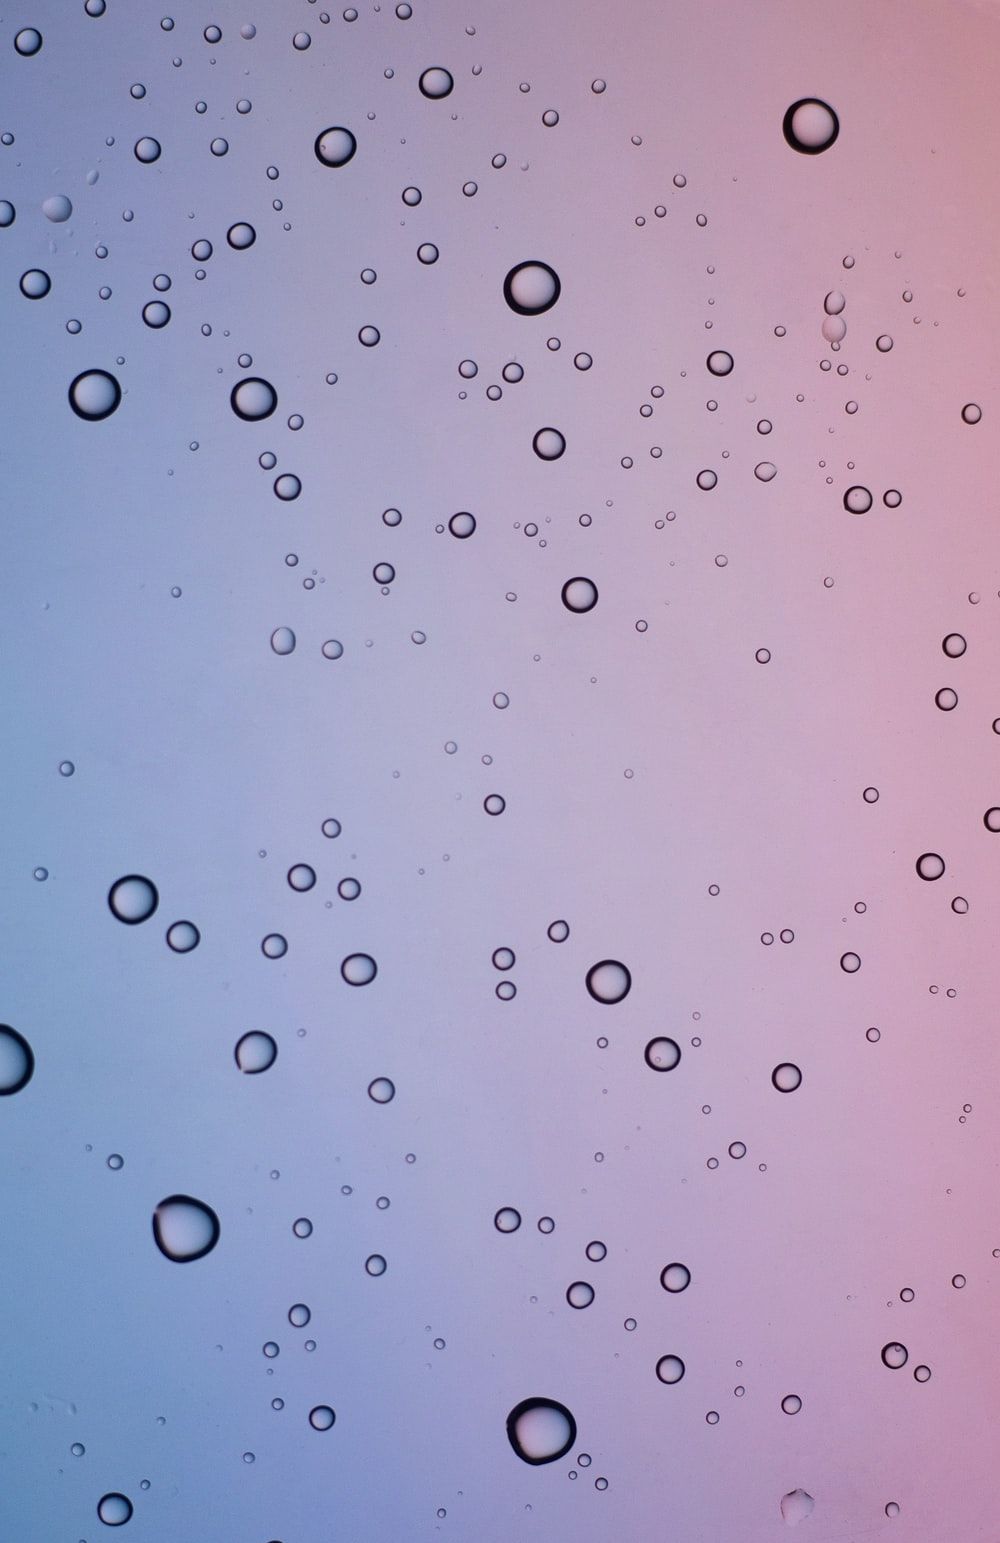 water droplets on pink surface photo